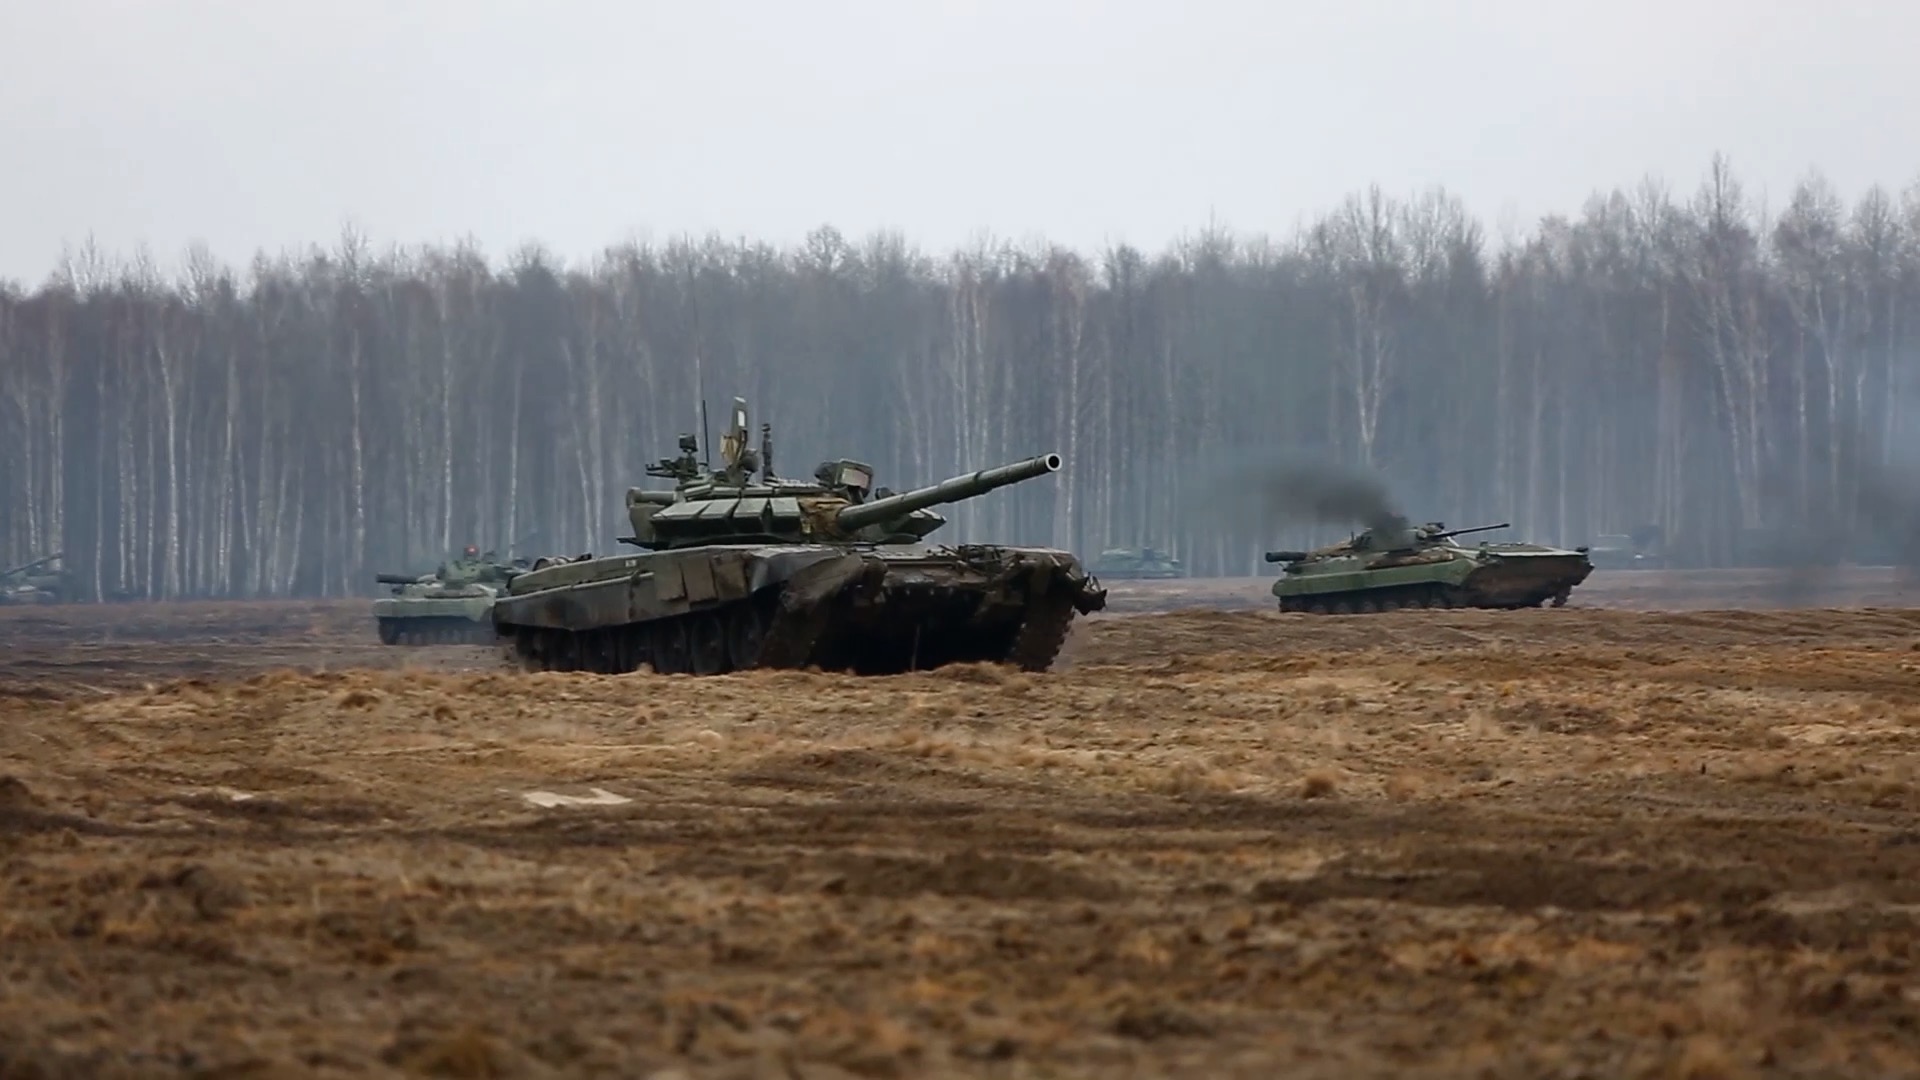 Image grab of footage released by the Russian defense ministry on February 11 showed tanks, helicopters, and fighter jets deployed in the drills in an unidentified location in Belarus.